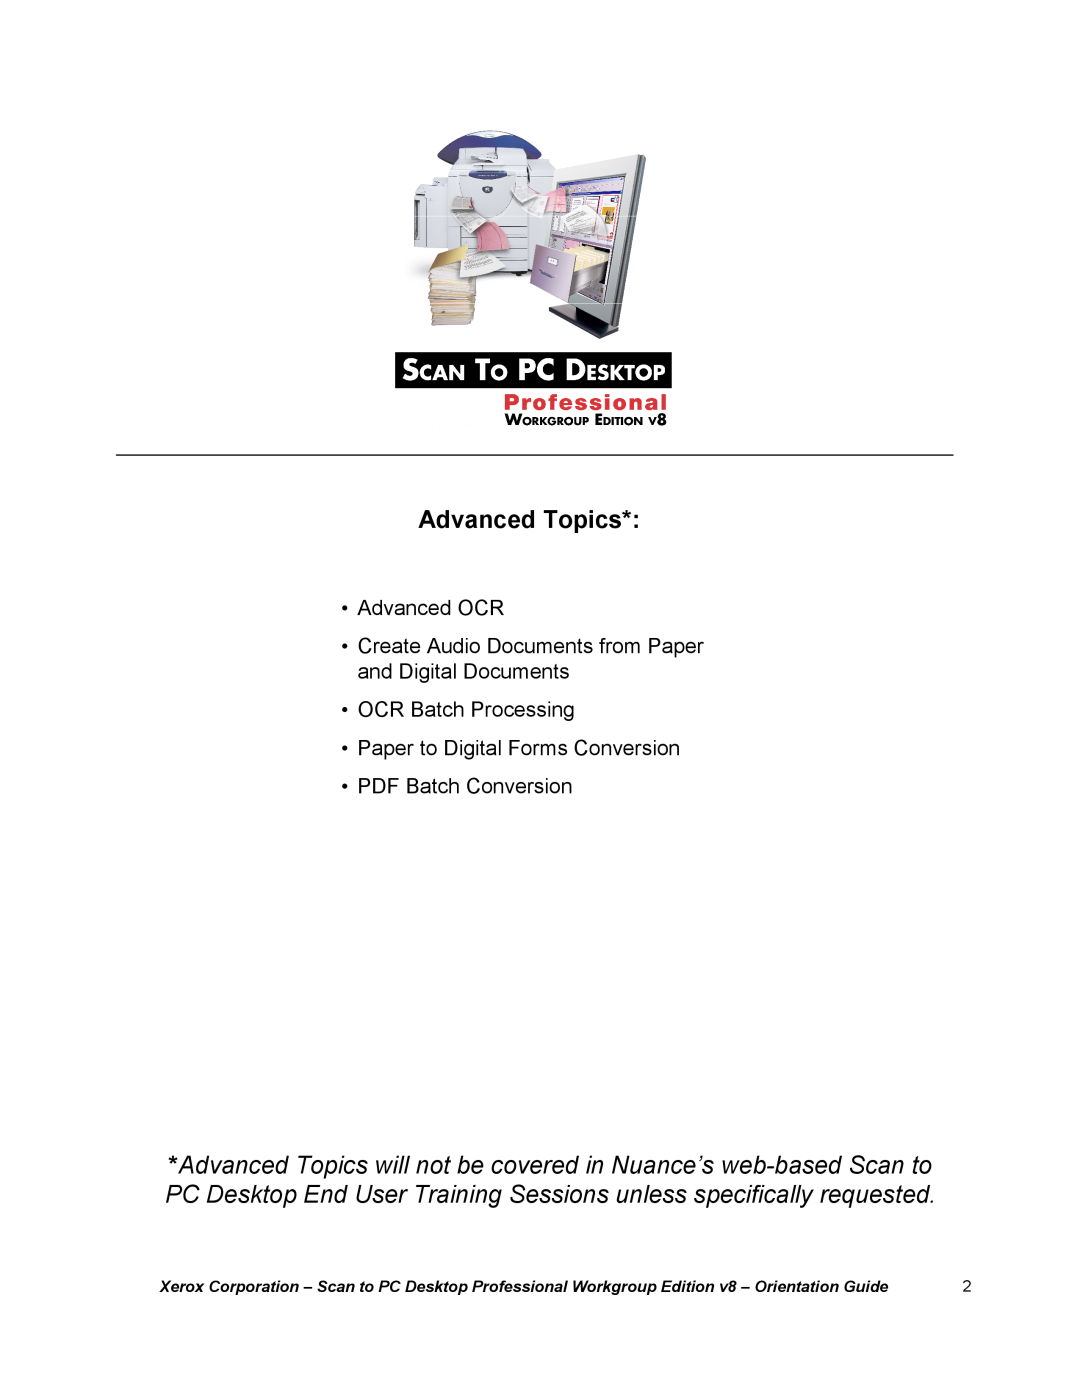 Xerox G8144Z Advanced Topics, Advanced OCR Create Audio Documents from Paper and Digital Documents, PDF Batch Conversion 